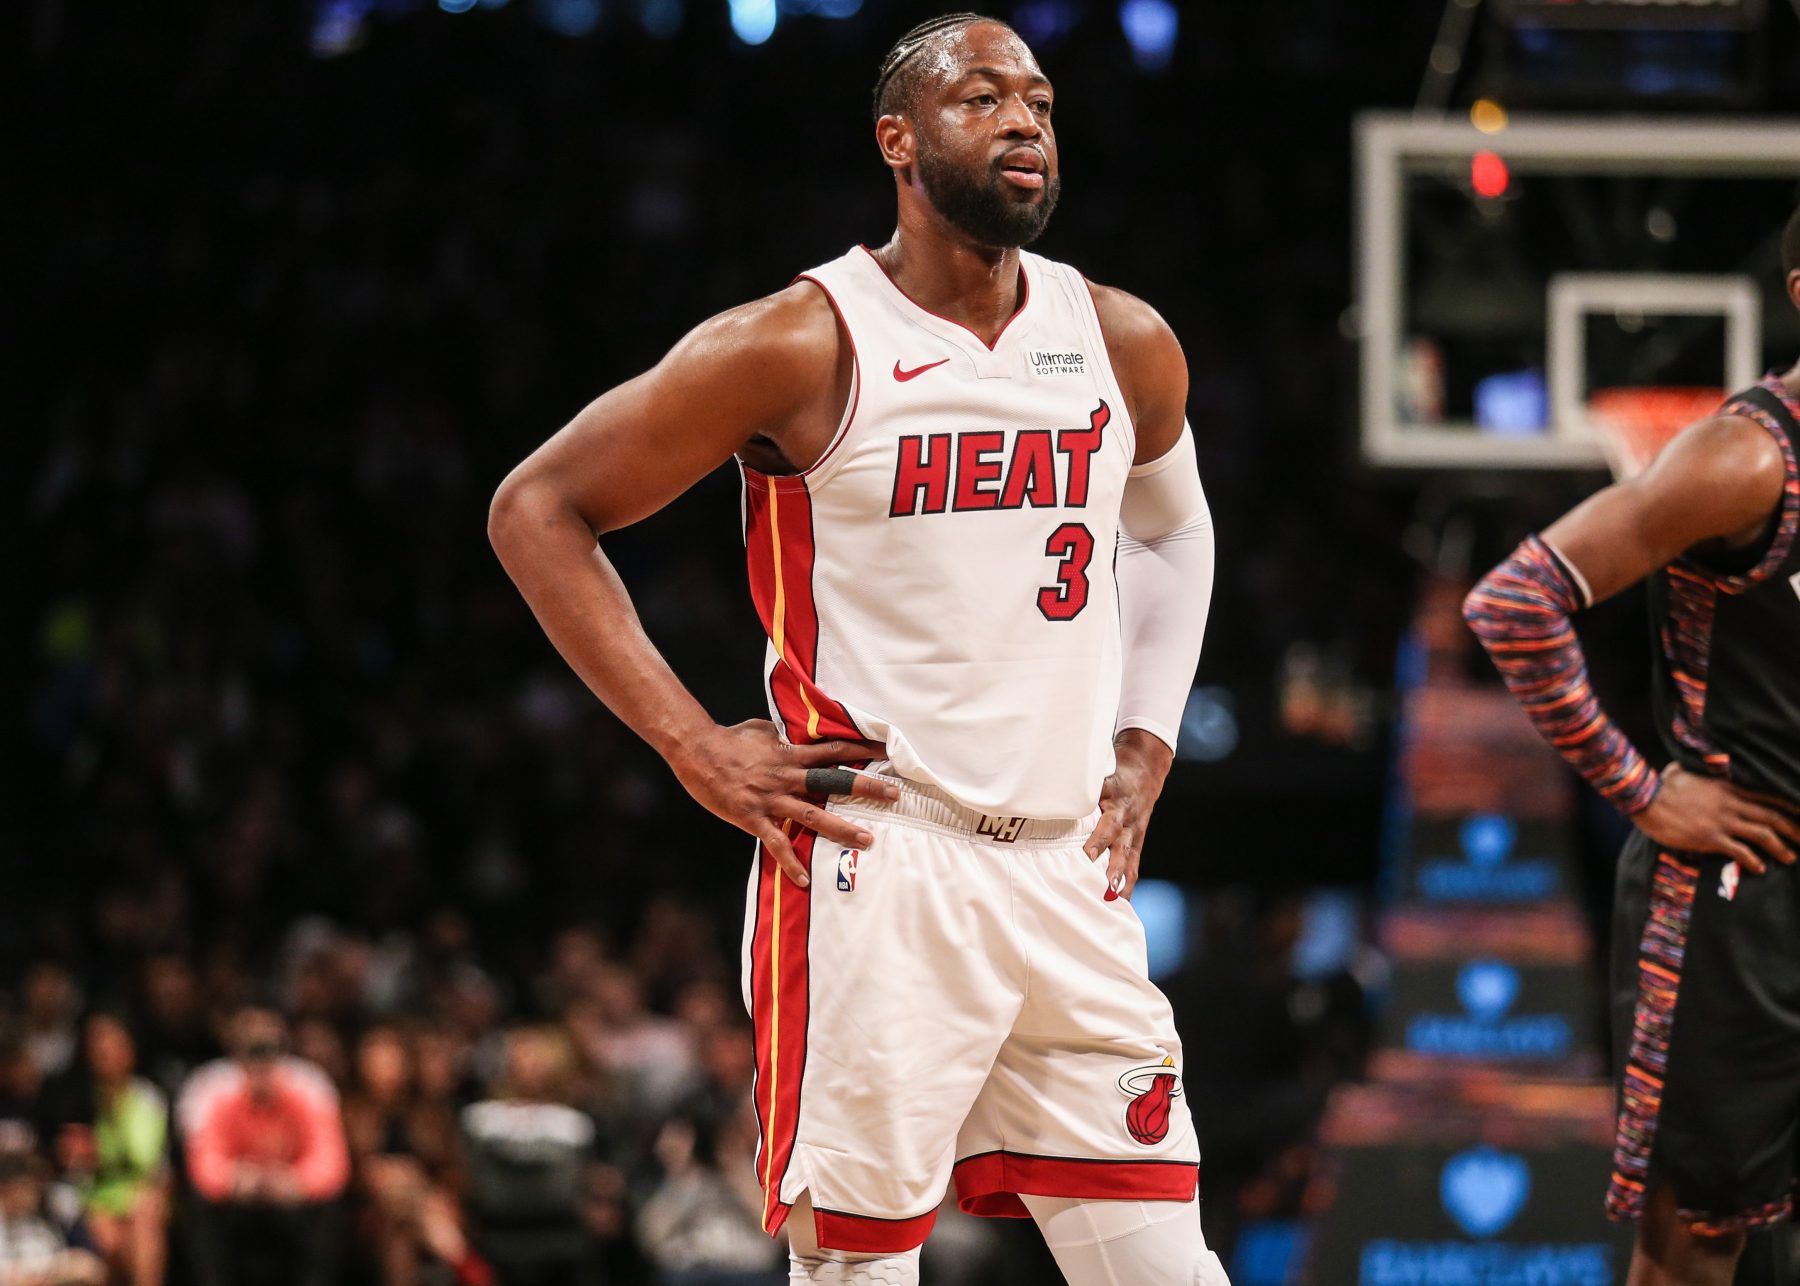 Report: Miami Heat Announce Dwyane Wade's 3 Day Retirement